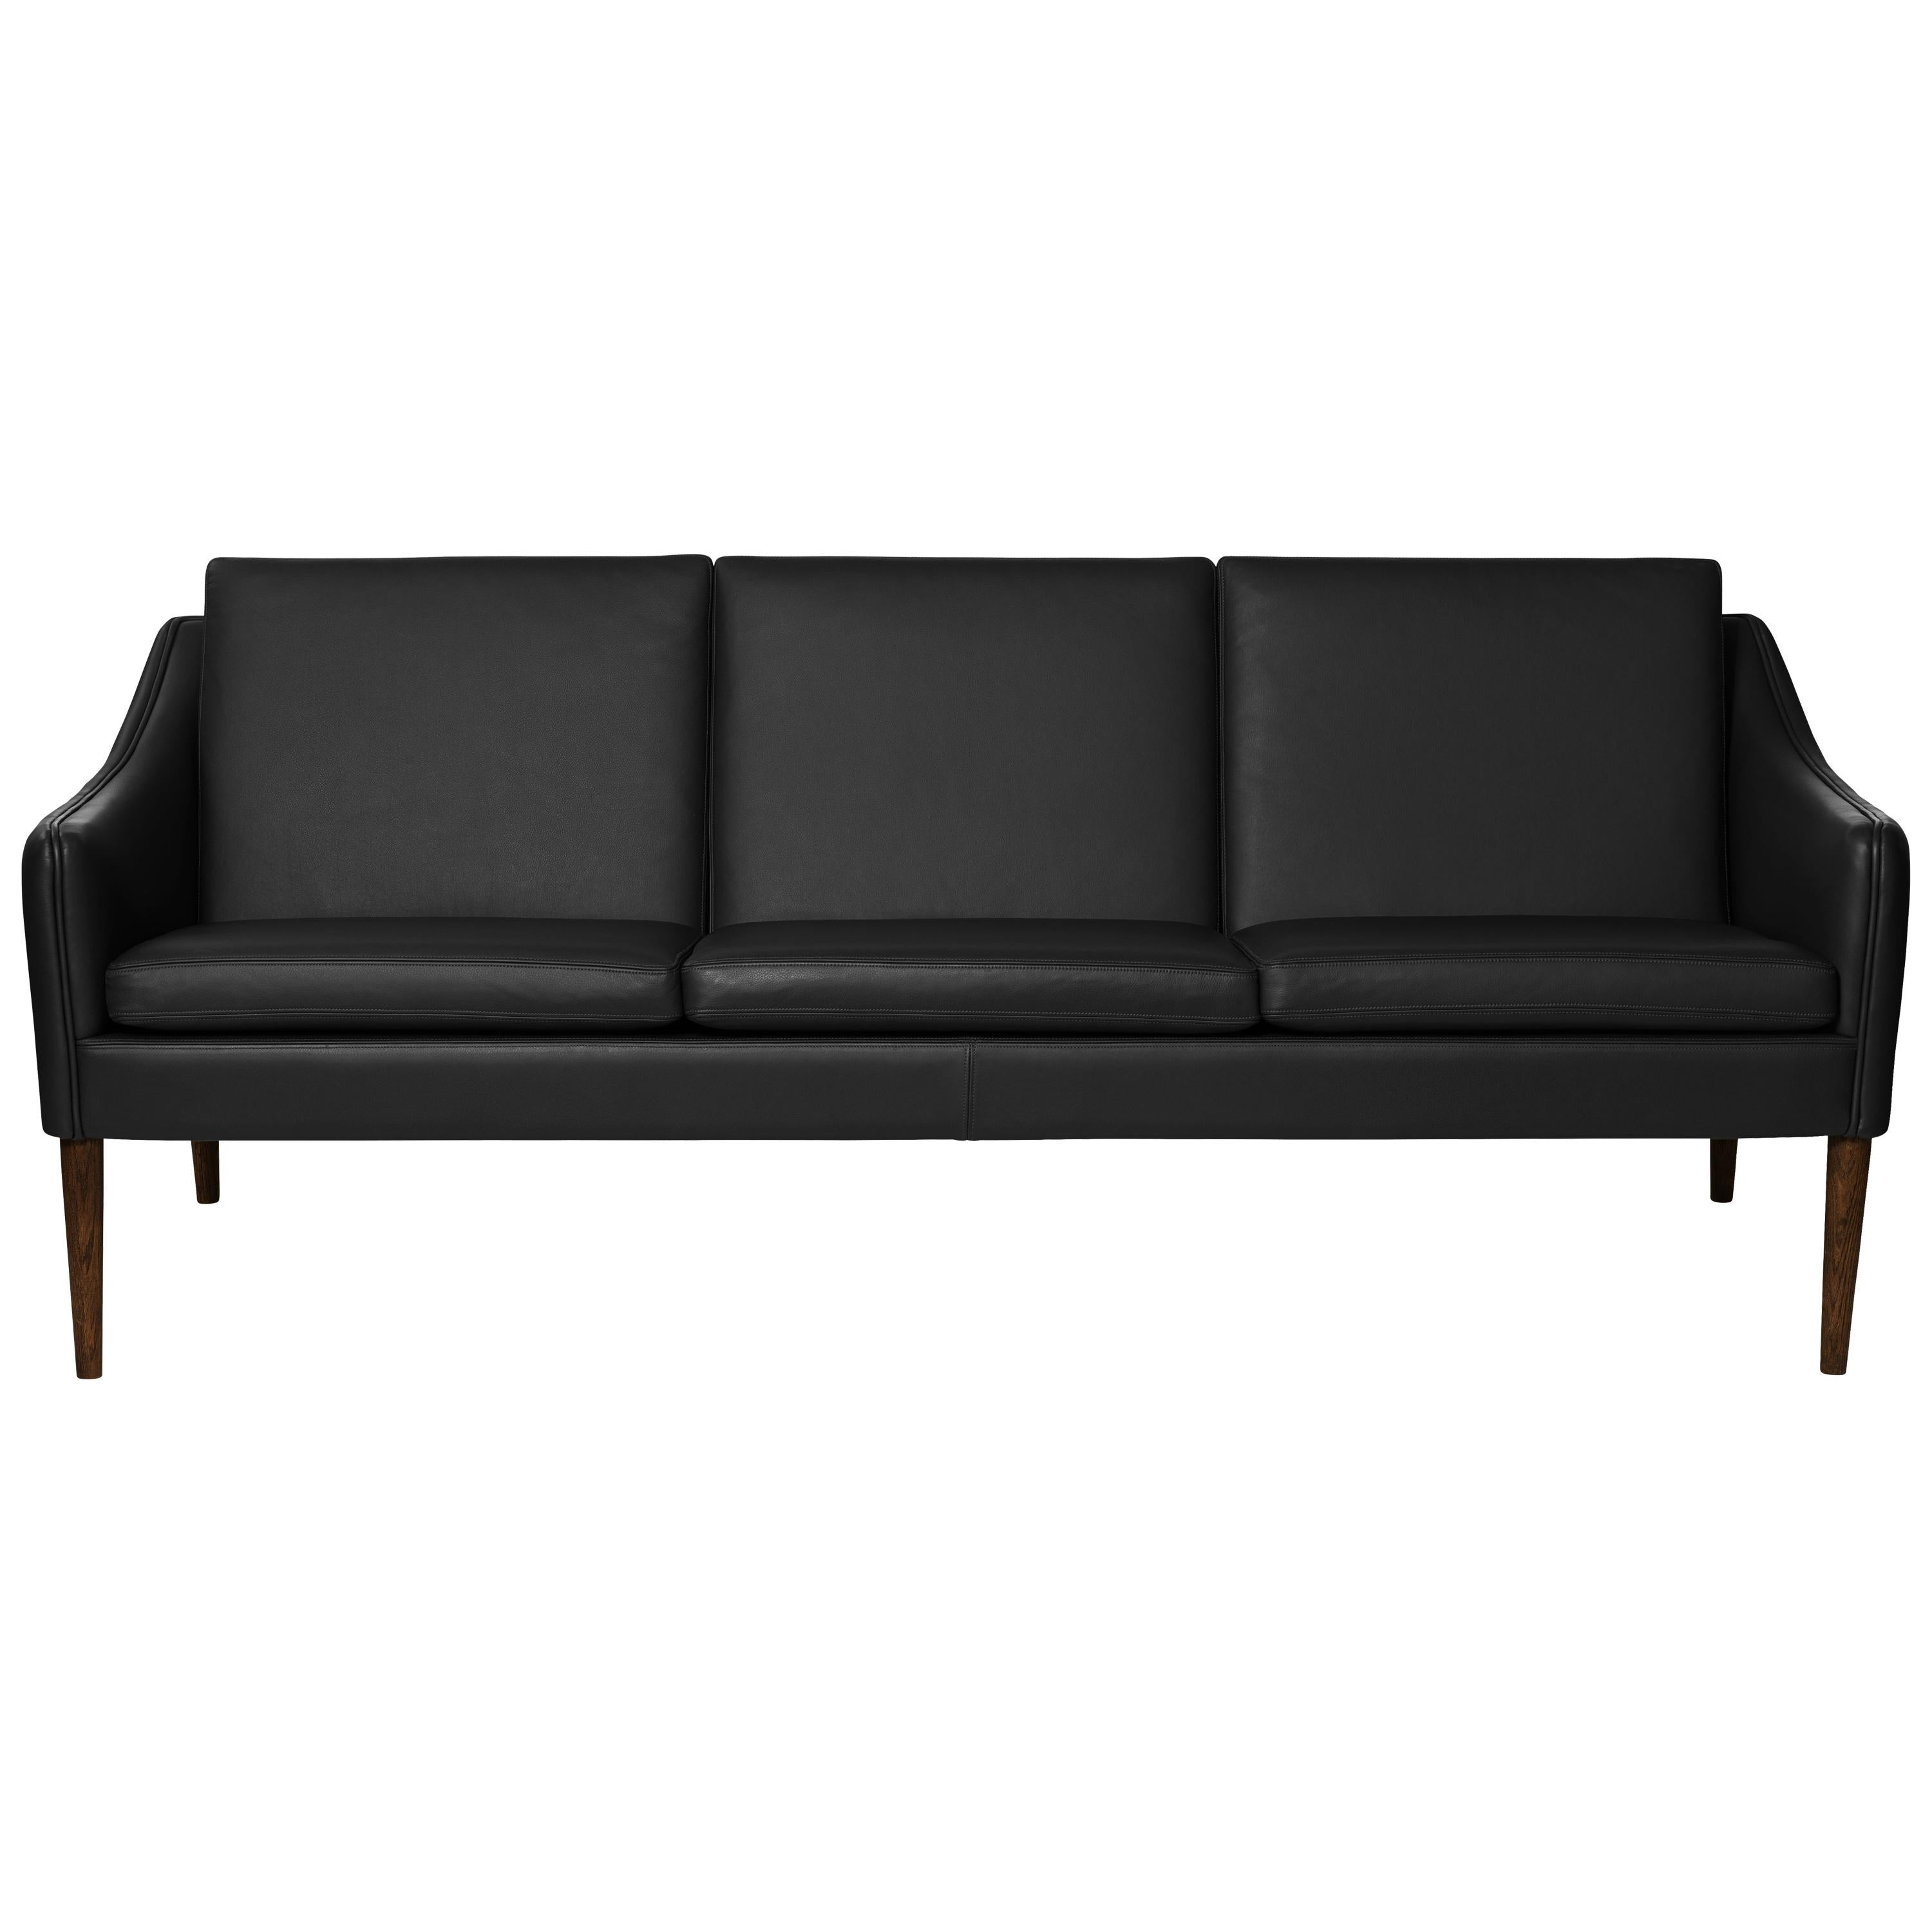 For Sale: Black (Challenger Black) Mr. Olsen 3-Seat Sofa with Walnut Legs, by Hans Olsen from Warm Nordic